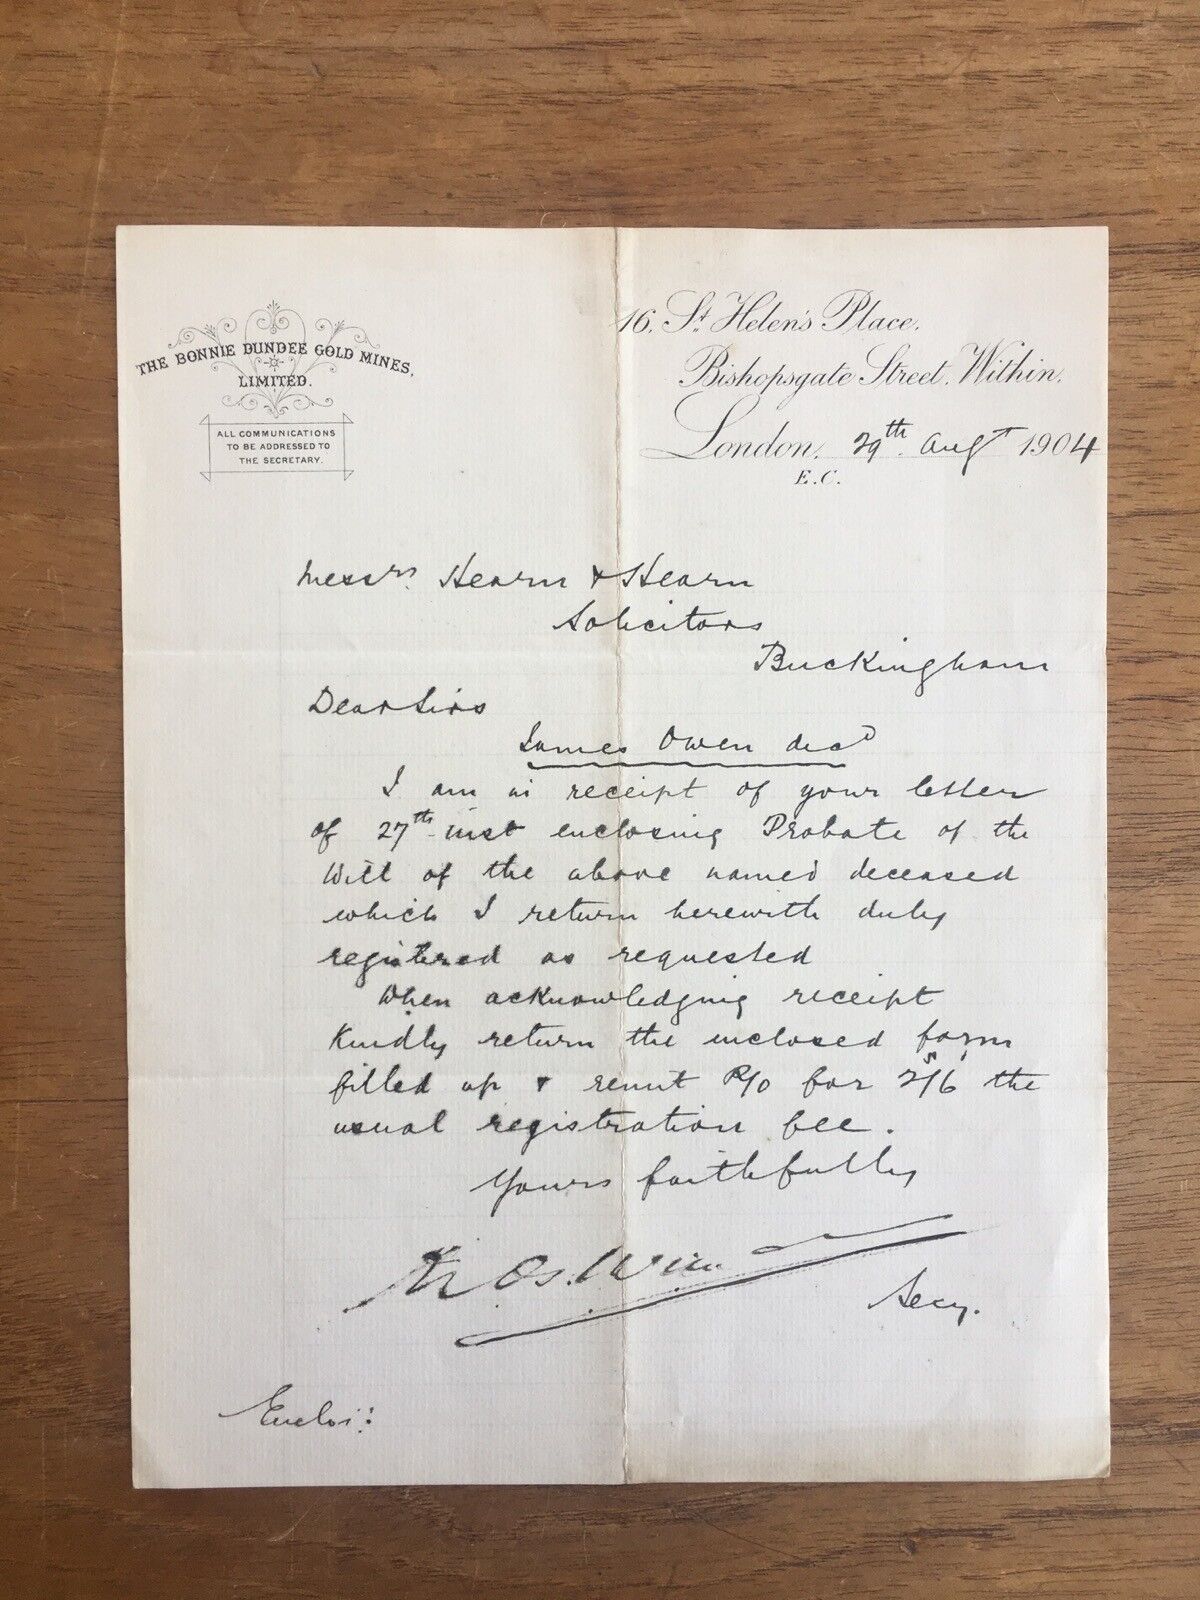 1904 THE BONNIE DUNDEE GOLD MINES NSW HANDWRITTEN LETTER DECEASED (F7P9)